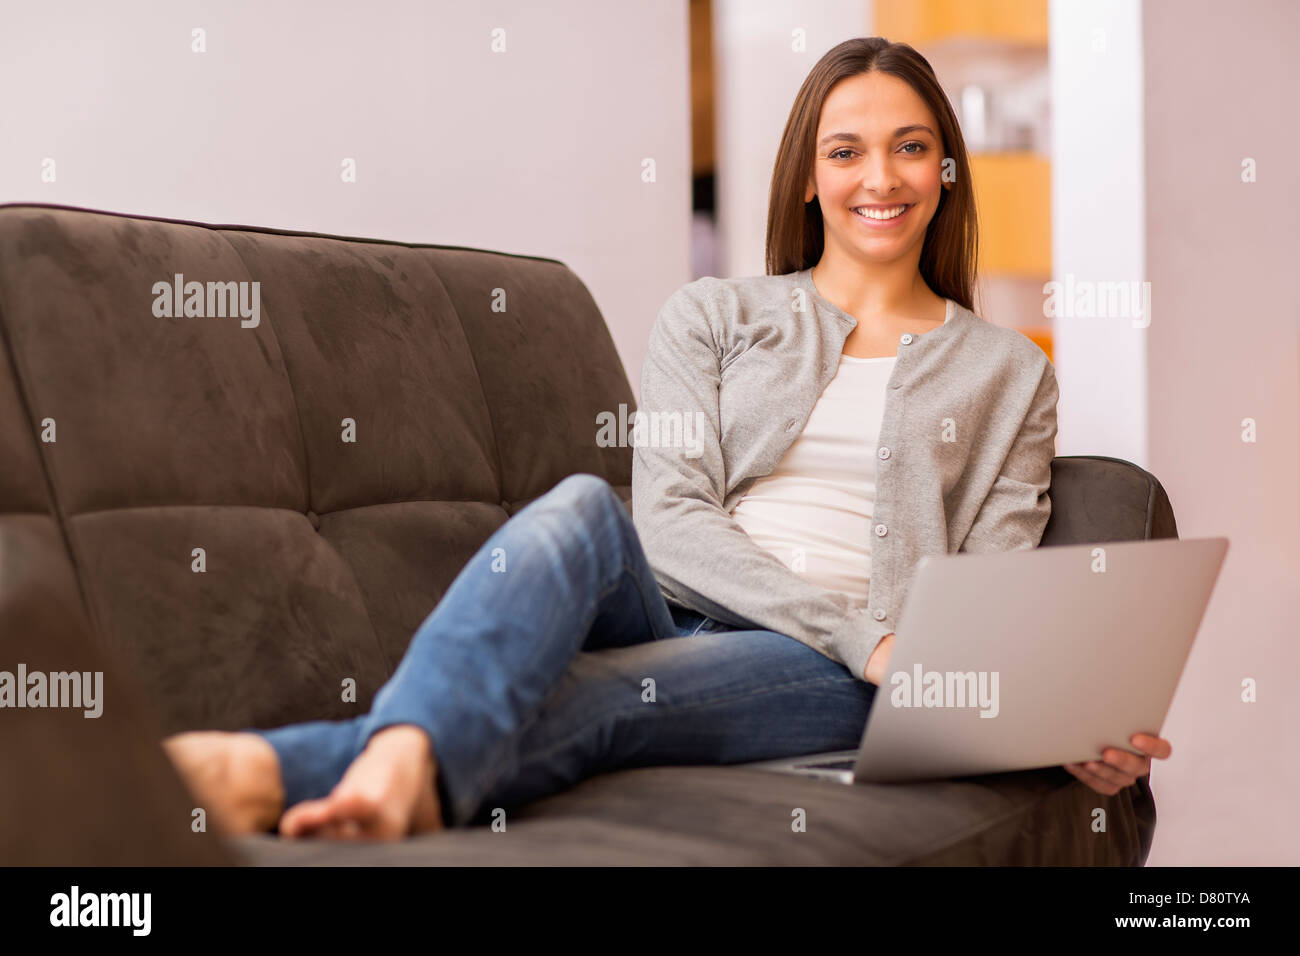 Smiling female teleworking at home Stock Photo